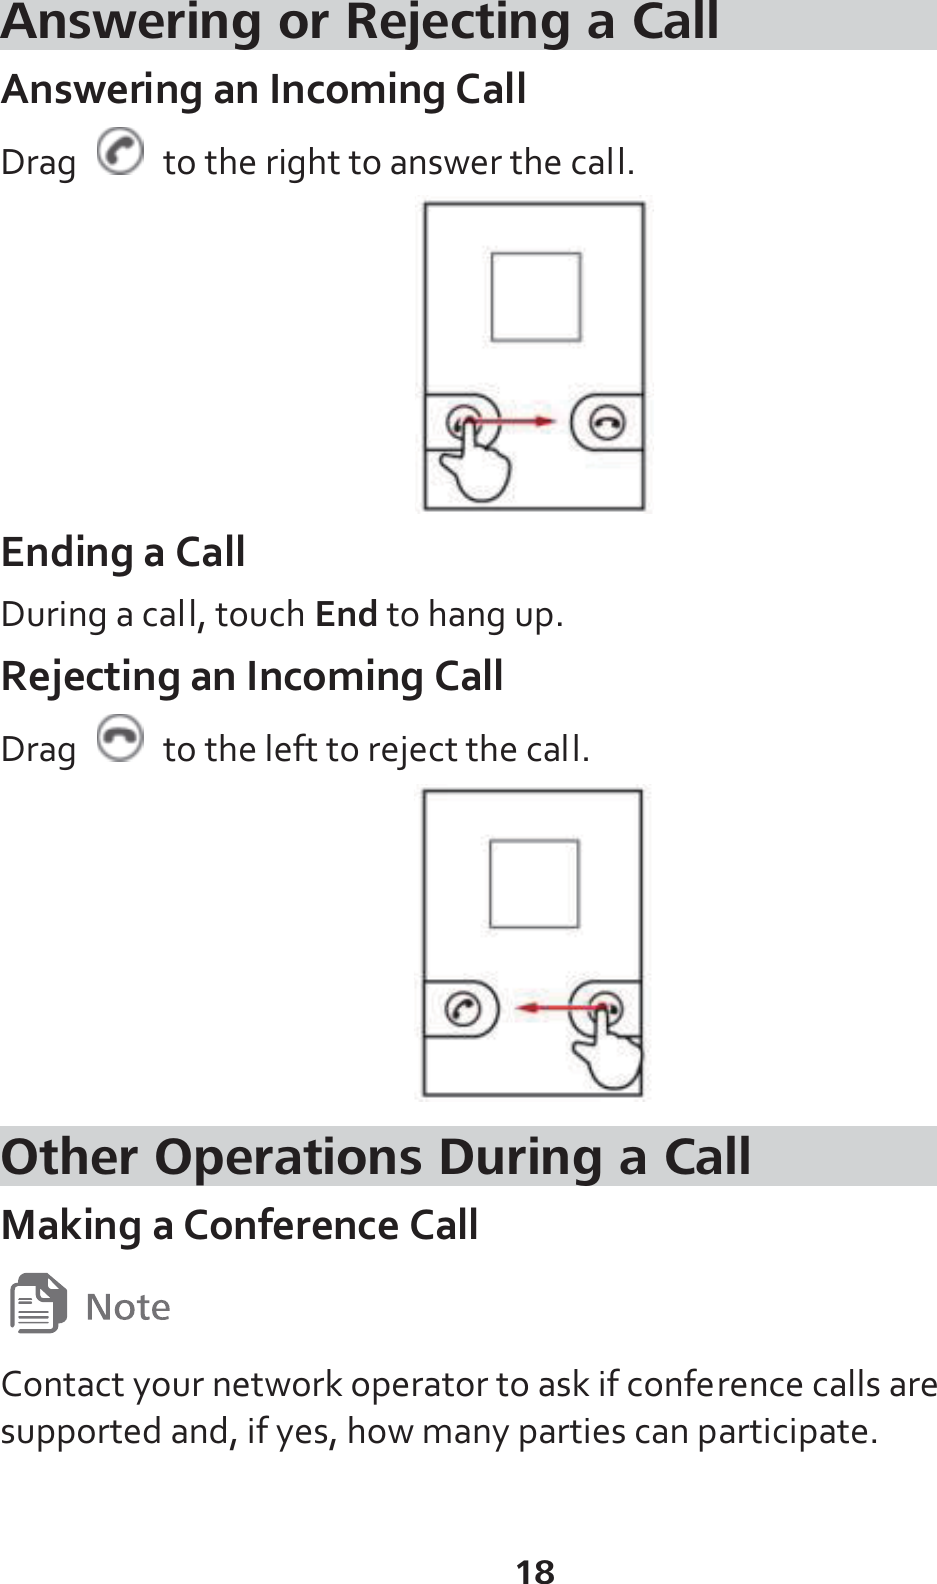 18 Answering or Rejecting a Call Answering an Incoming Call Drag    to the right to answer the call.  Ending a Call During a call, touch End to hang up. Rejecting an Incoming Call Drag    to the left to reject the call.  Other Operations During a Call Making a Conference Call  Contact your network operator to ask if conference calls are supported and, if yes, how many parties can participate.  